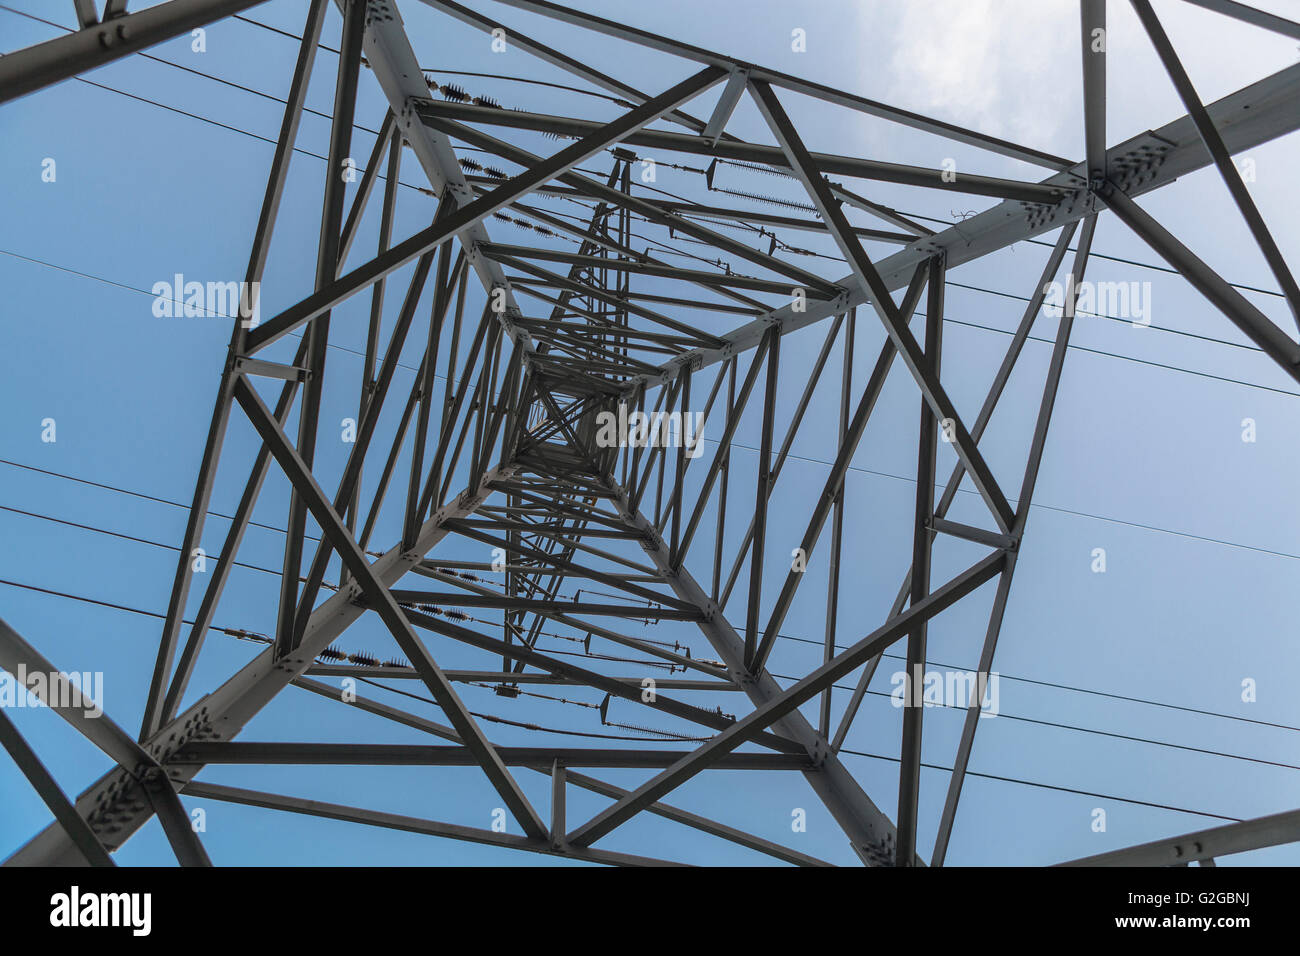 Abstract View Inside Of A High Voltage Electricity Pole G2GBNJ 